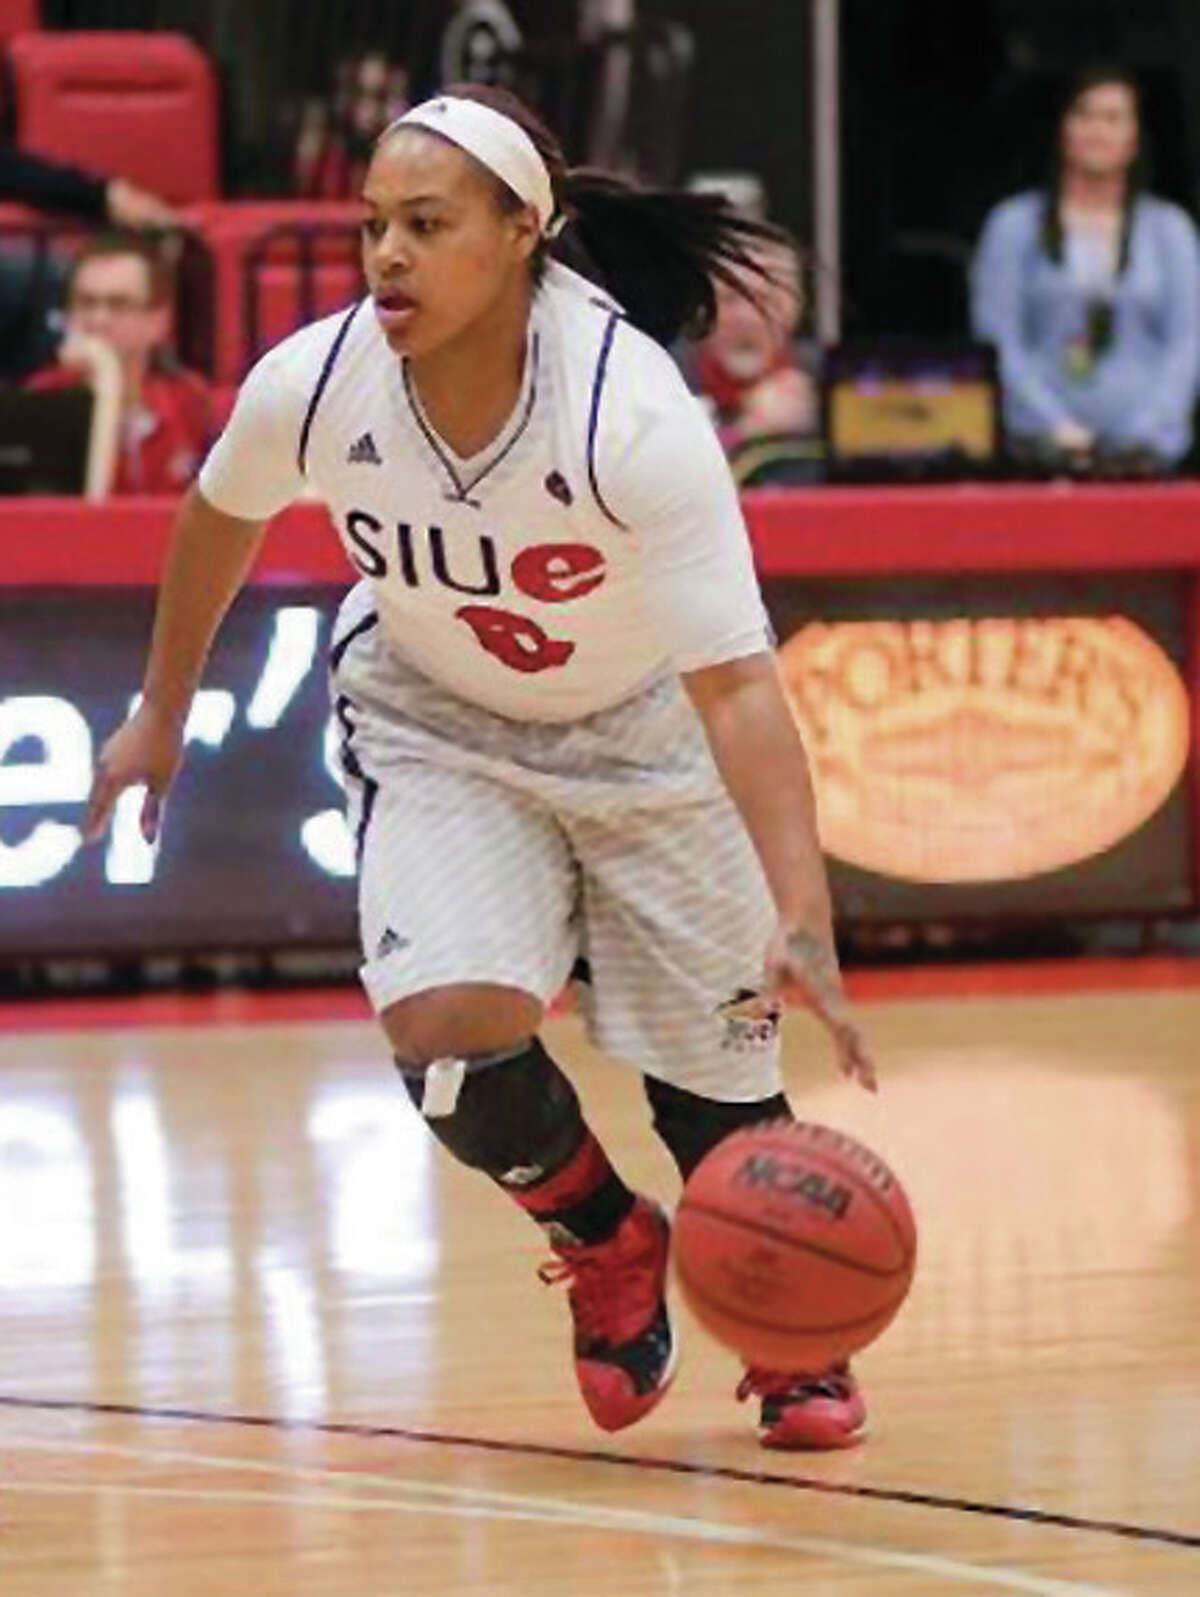 SIUE senior Shronda Butts has been named Preseason OVC Player of the Year in balloting by conference coaches and sports information directors.